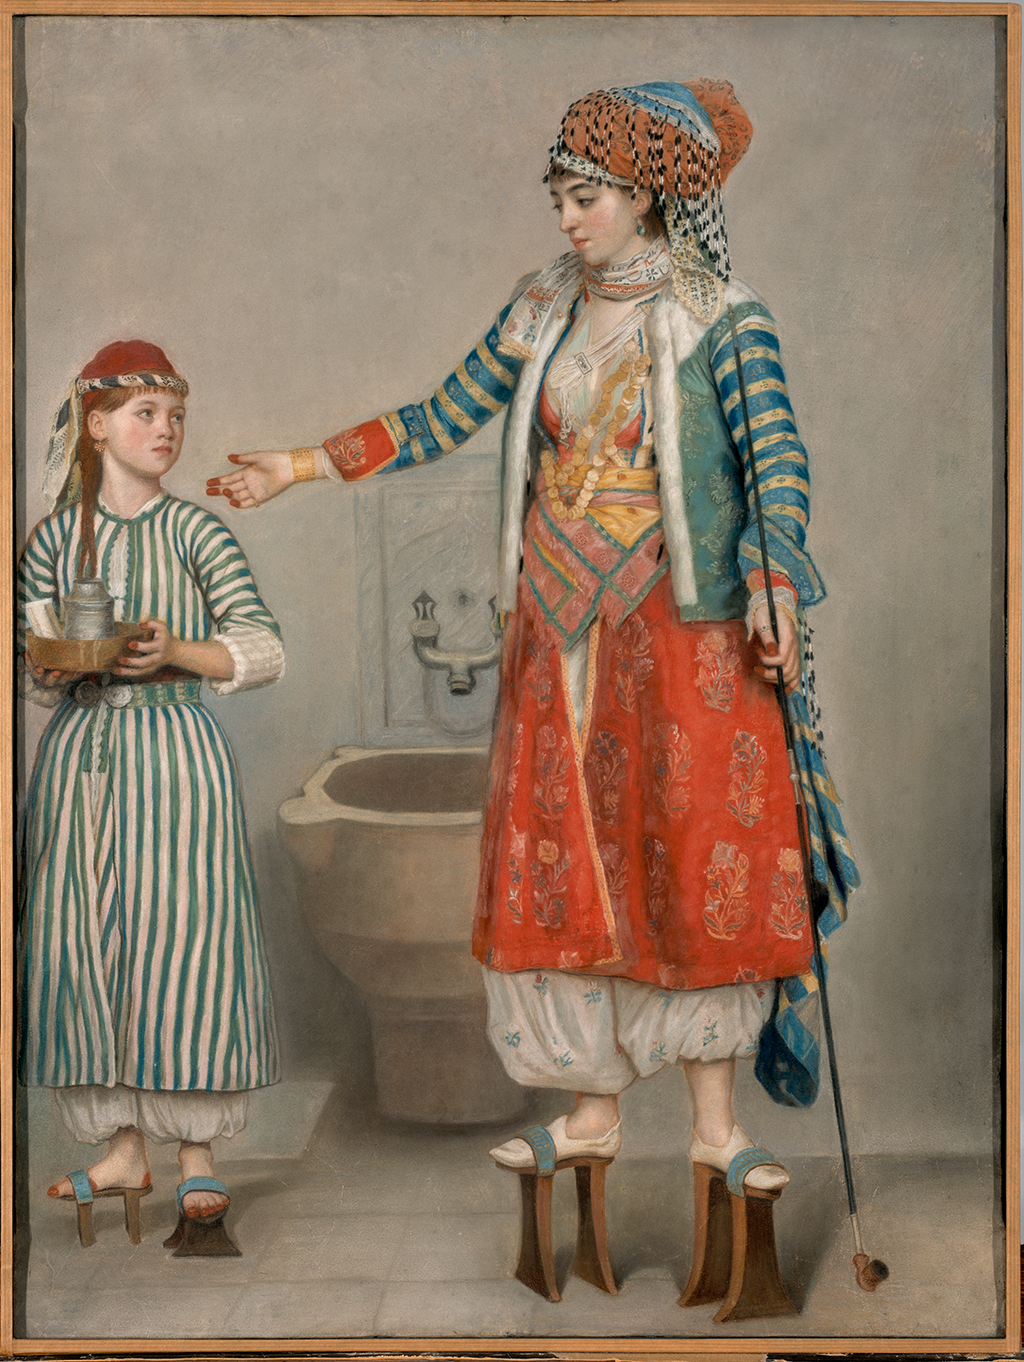 A painting of a woman and a young girl both standing on wooden hilts tied to their feet. The woman who wears red clothing reaches her hand out toward the young girl. The young girl also wears a cap and a dress with vertical stripes. She carries a bowl with a metal can inside it. In the background there is a sink sculpted into the wall. The painting is also surrounded by a light brown frame.